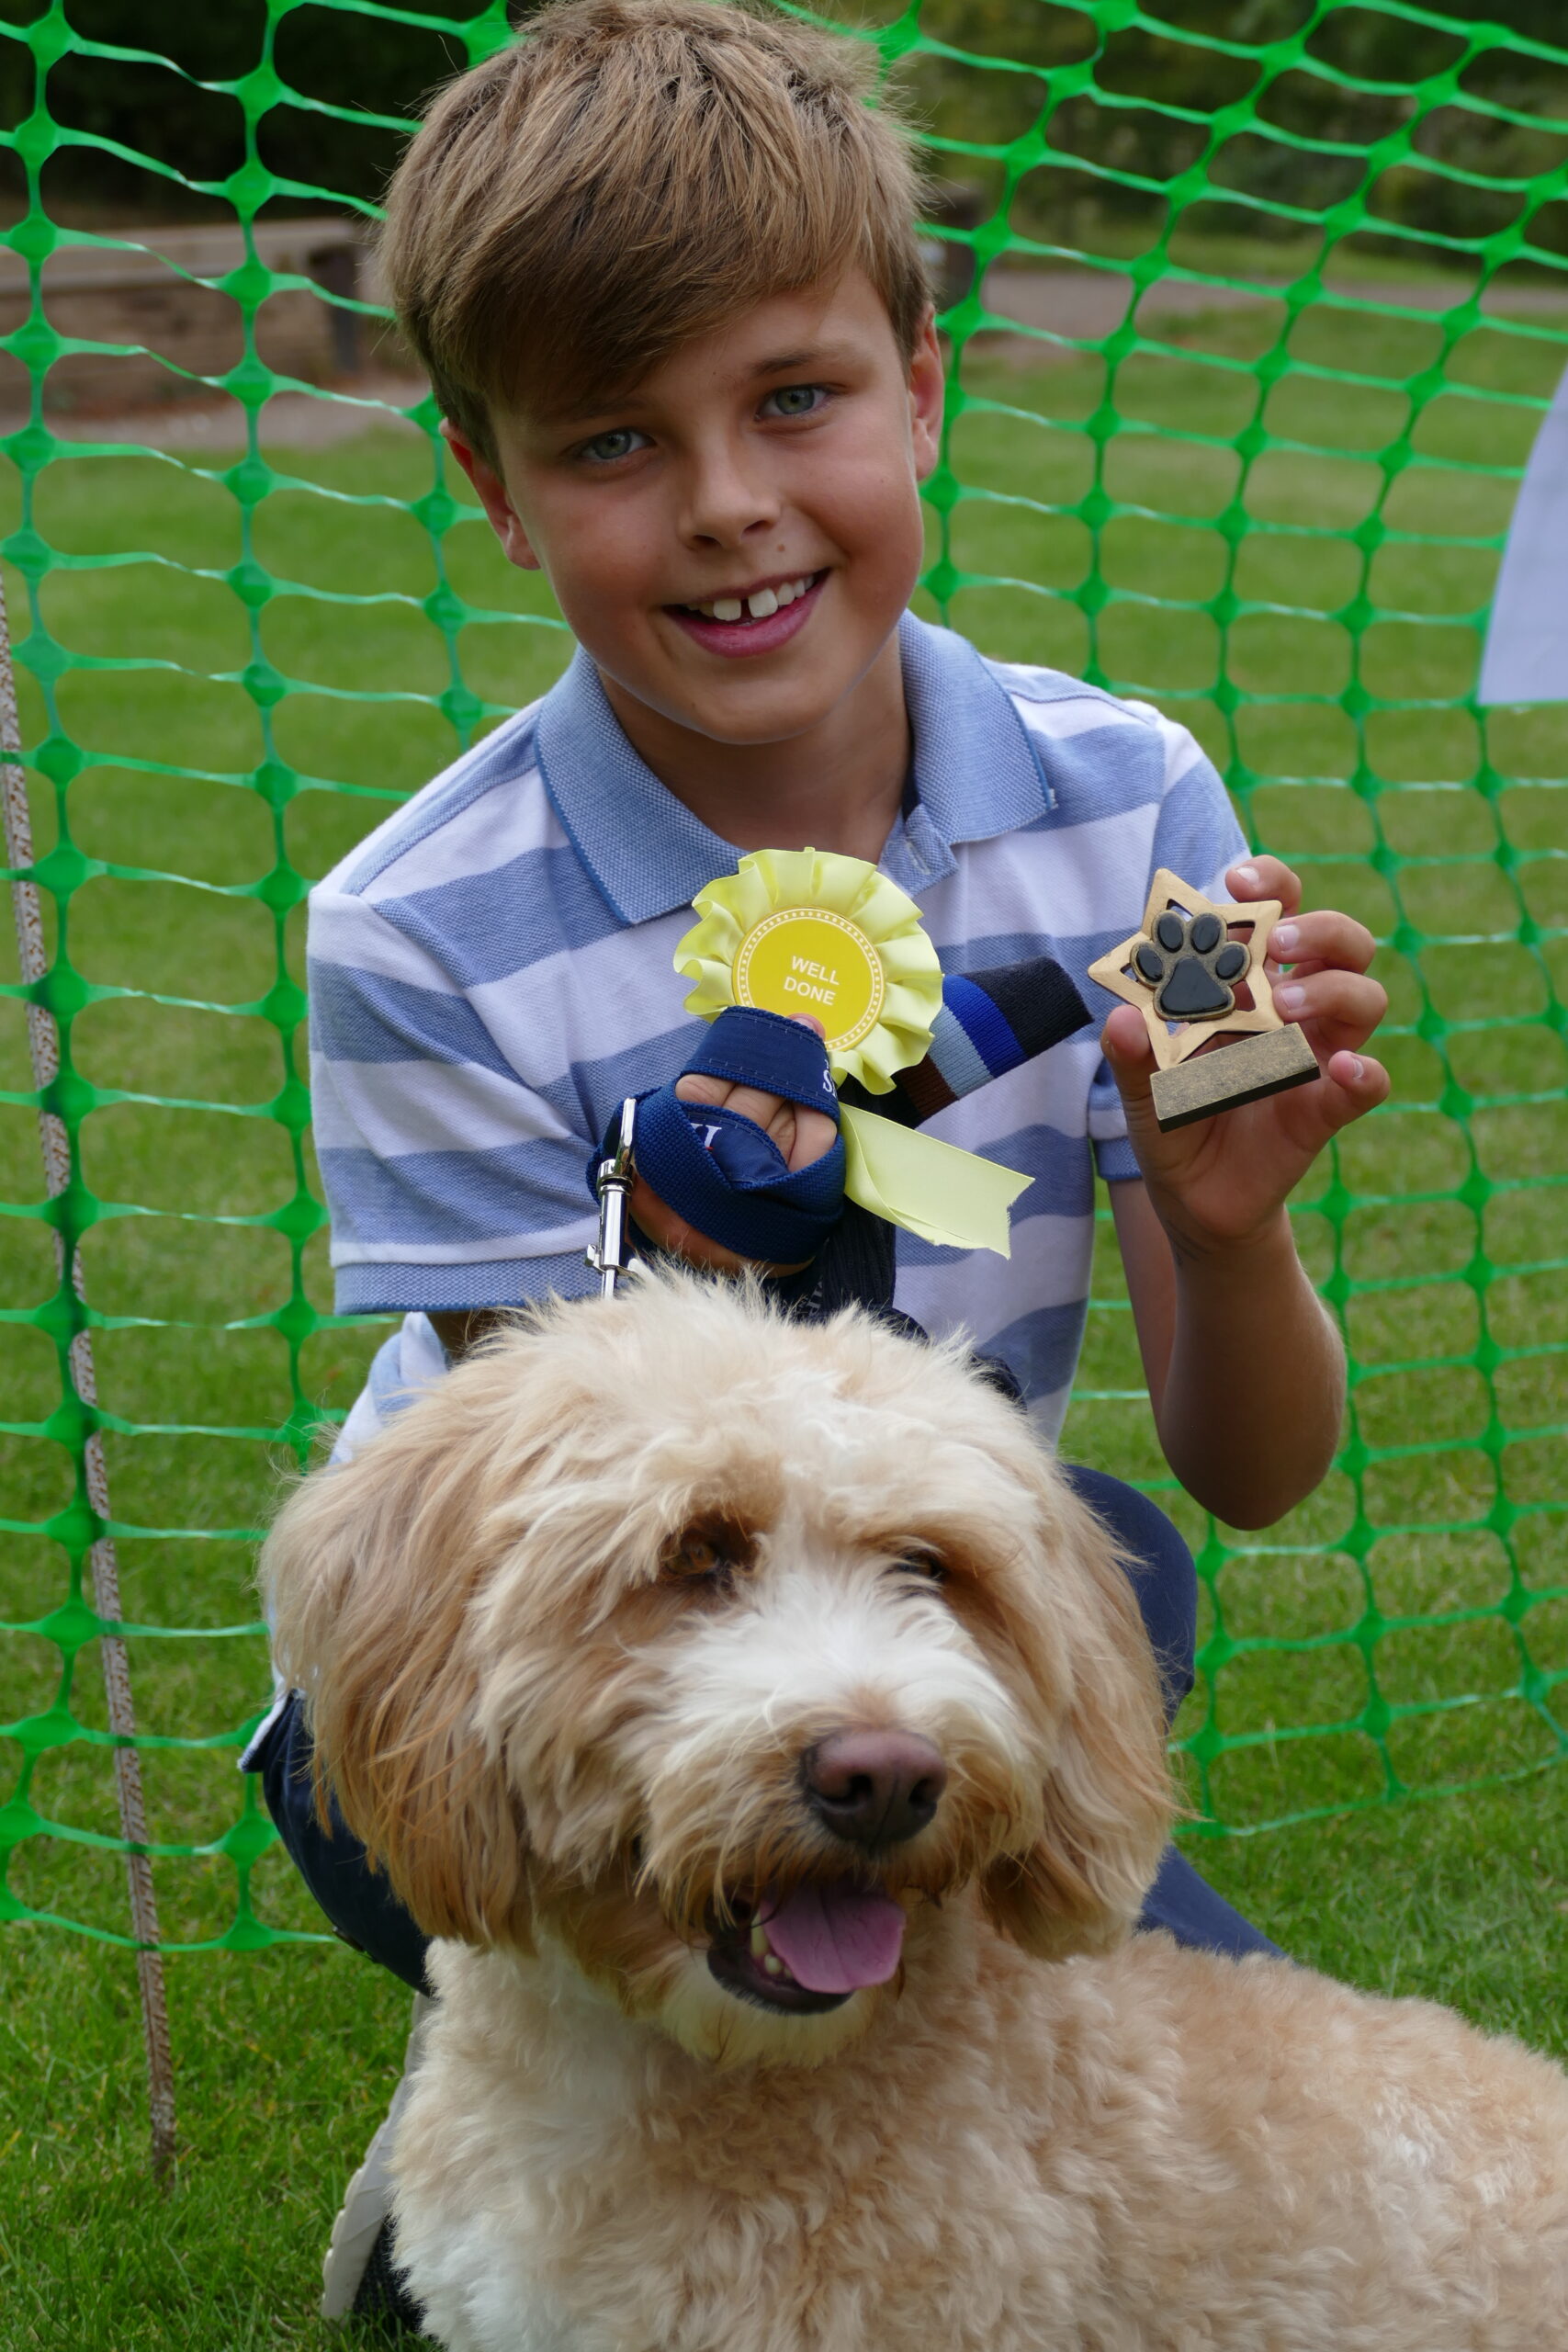 Proud winner of the 'Owner Look-a-like' at the St John's Beaumont Dog Show 2019